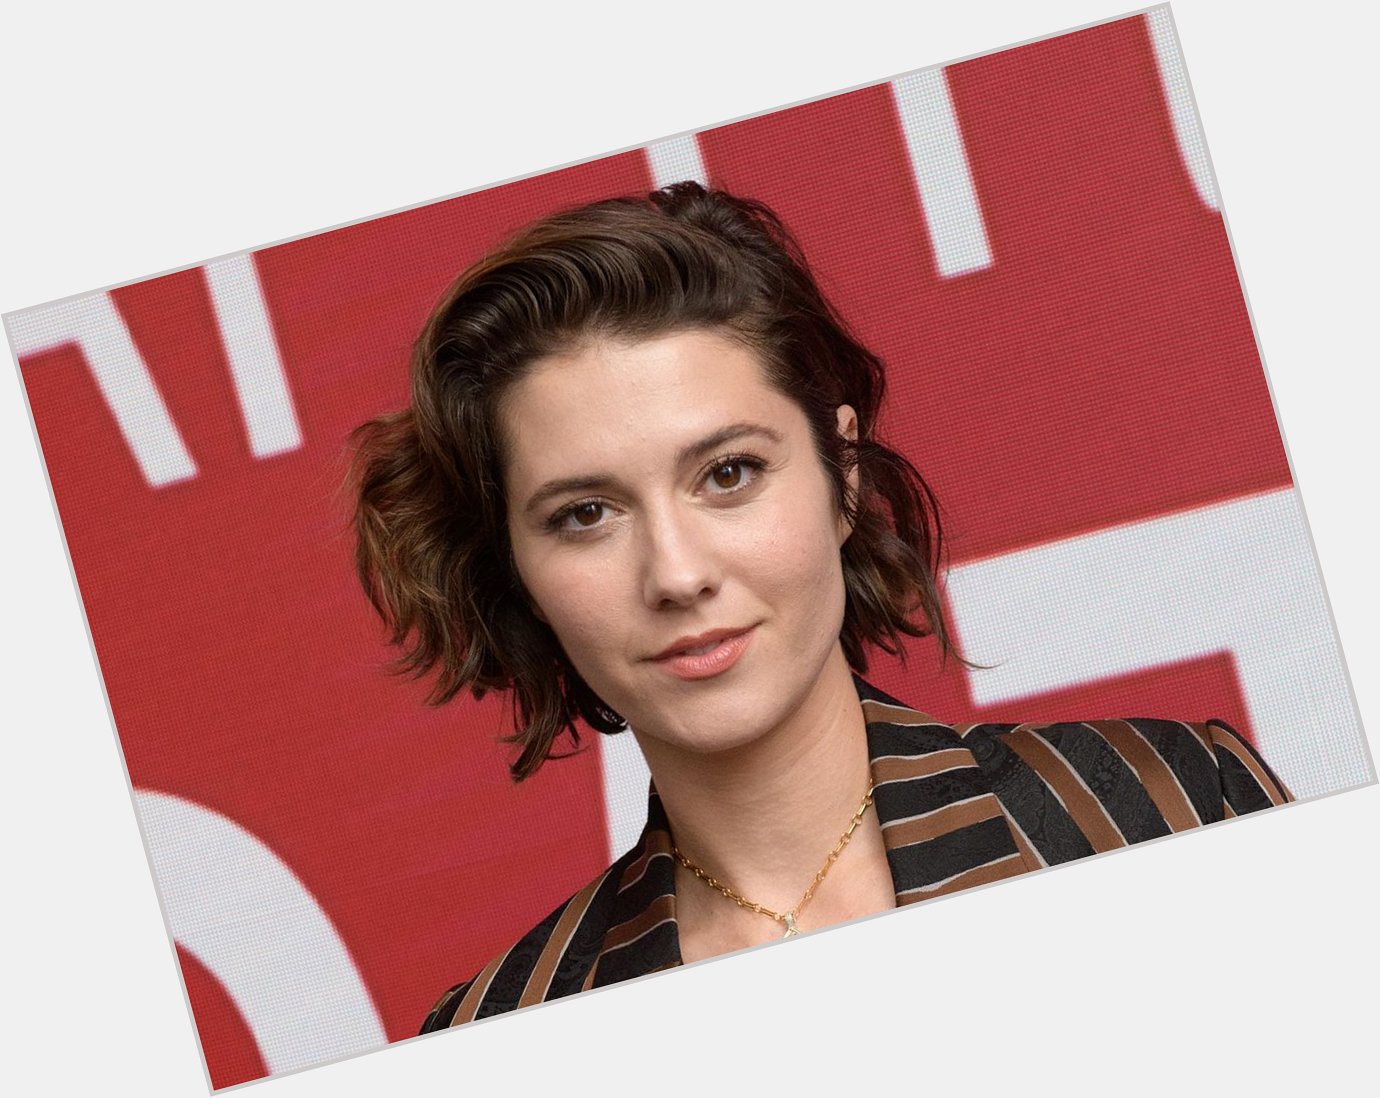 Happy 36th birthday to Mary Elizabeth Winstead!!

Which is your favorite performance from the actress? 